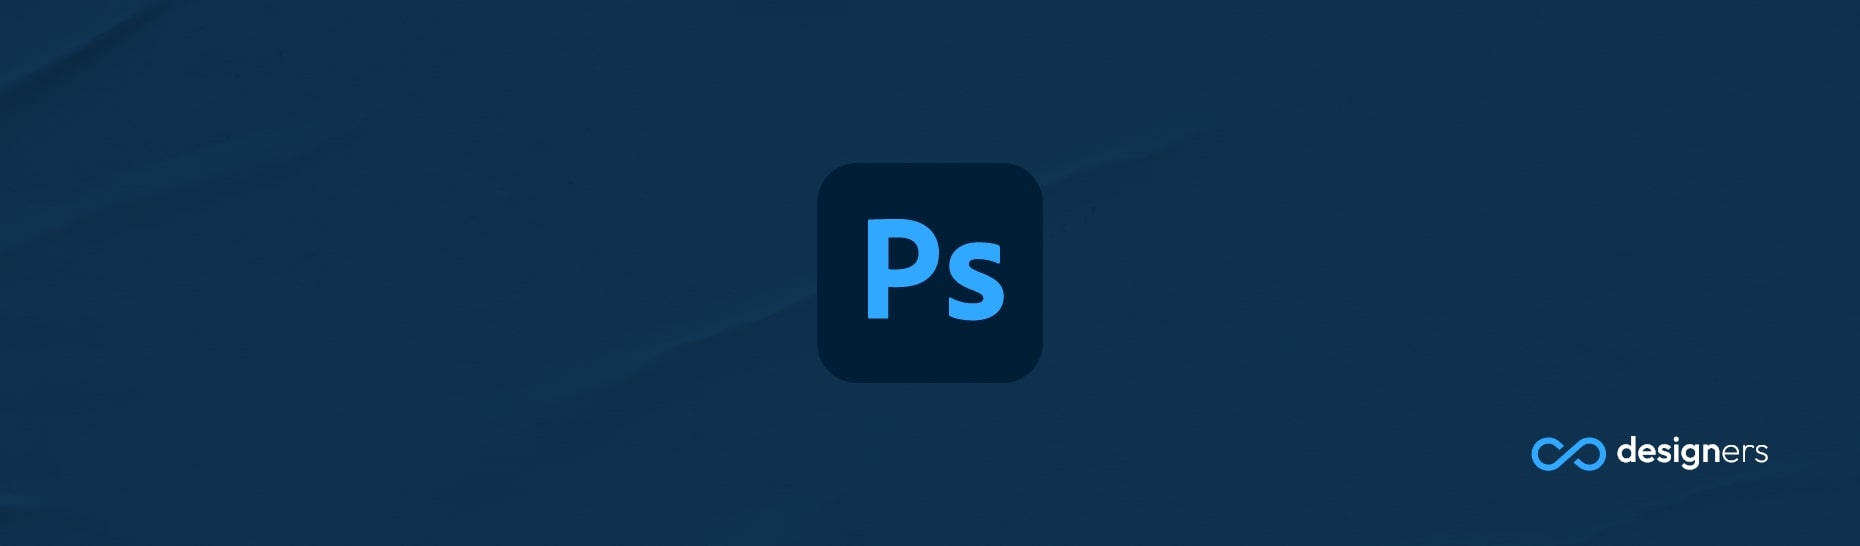 What size is a YouTube thumbnail in Photoshop?